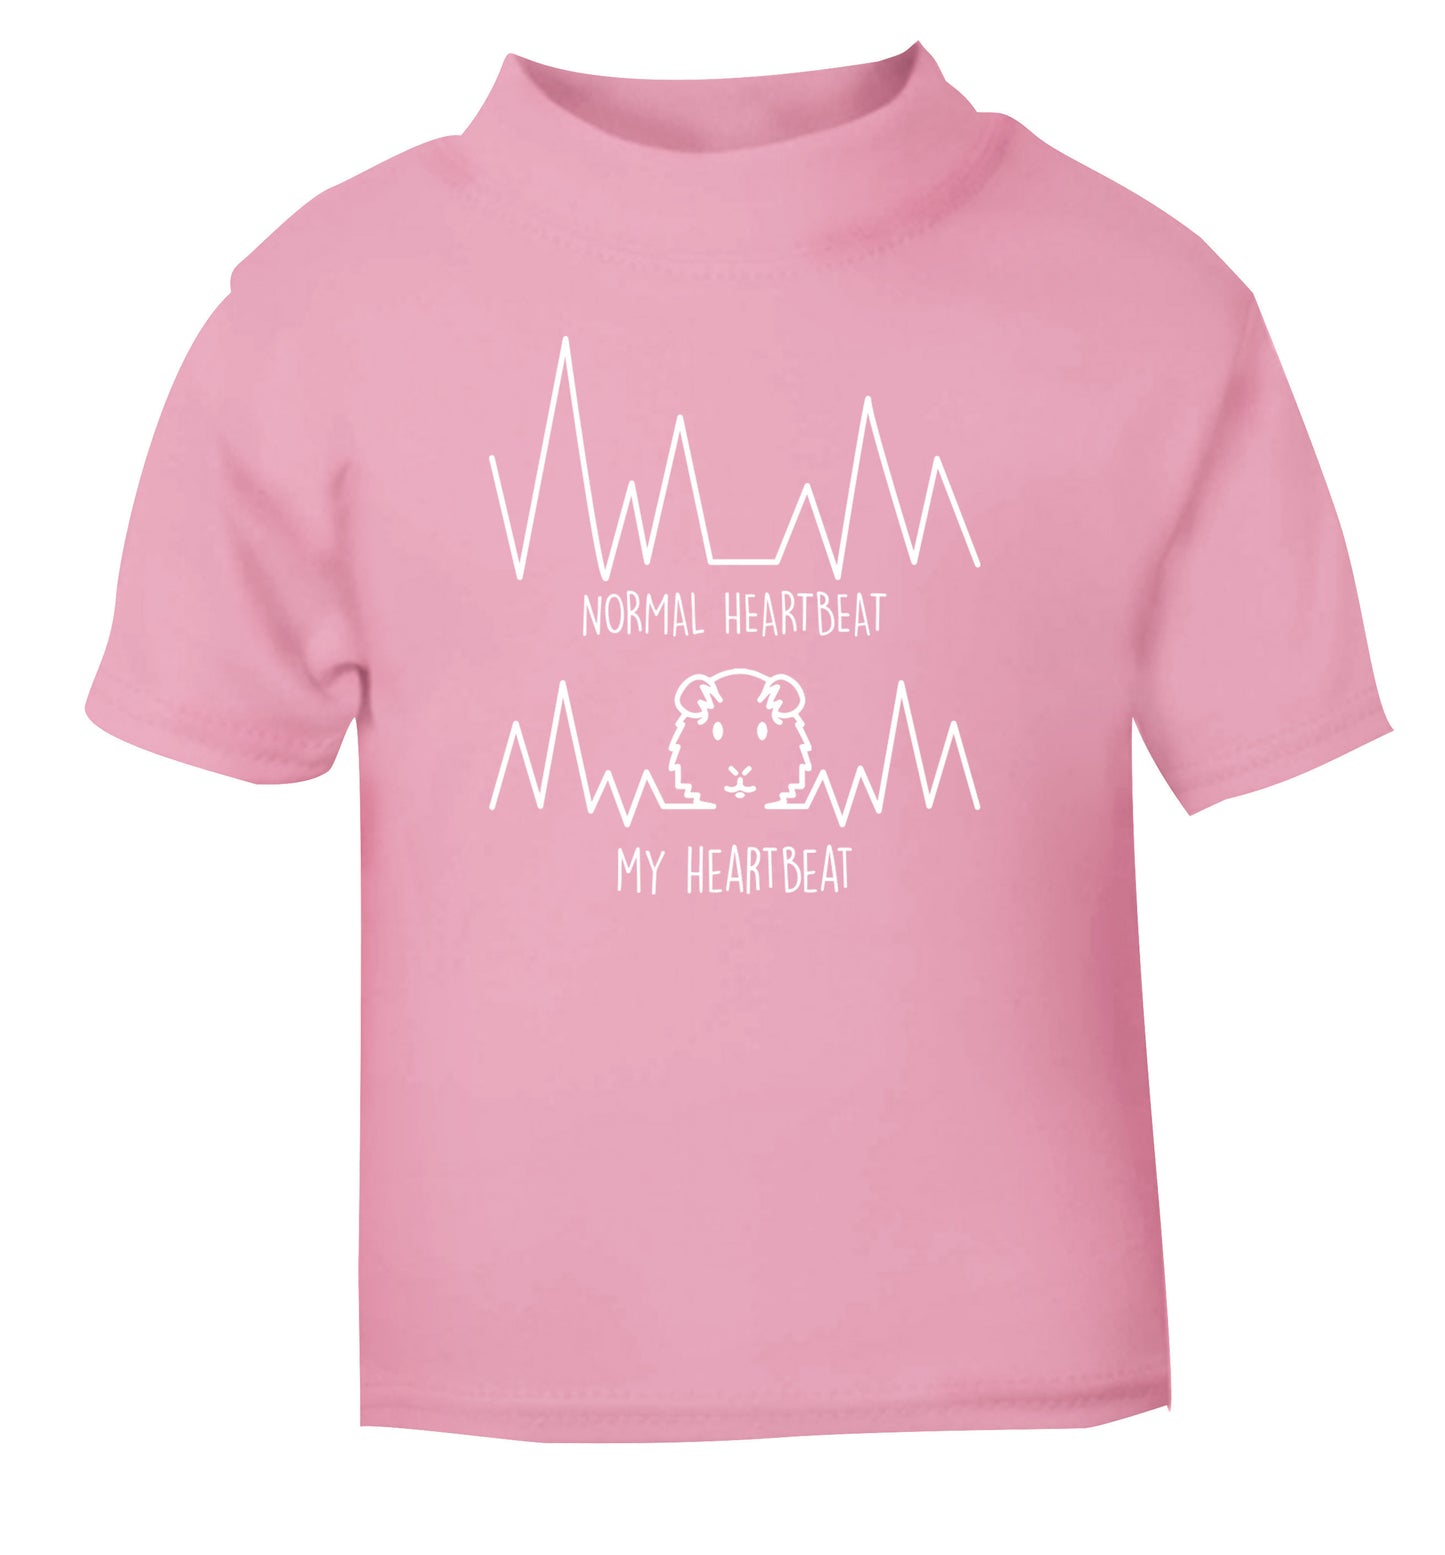 Normal heartbeat vs my heartbeat guinea pig lover light pink Baby Toddler Tshirt 2 Years